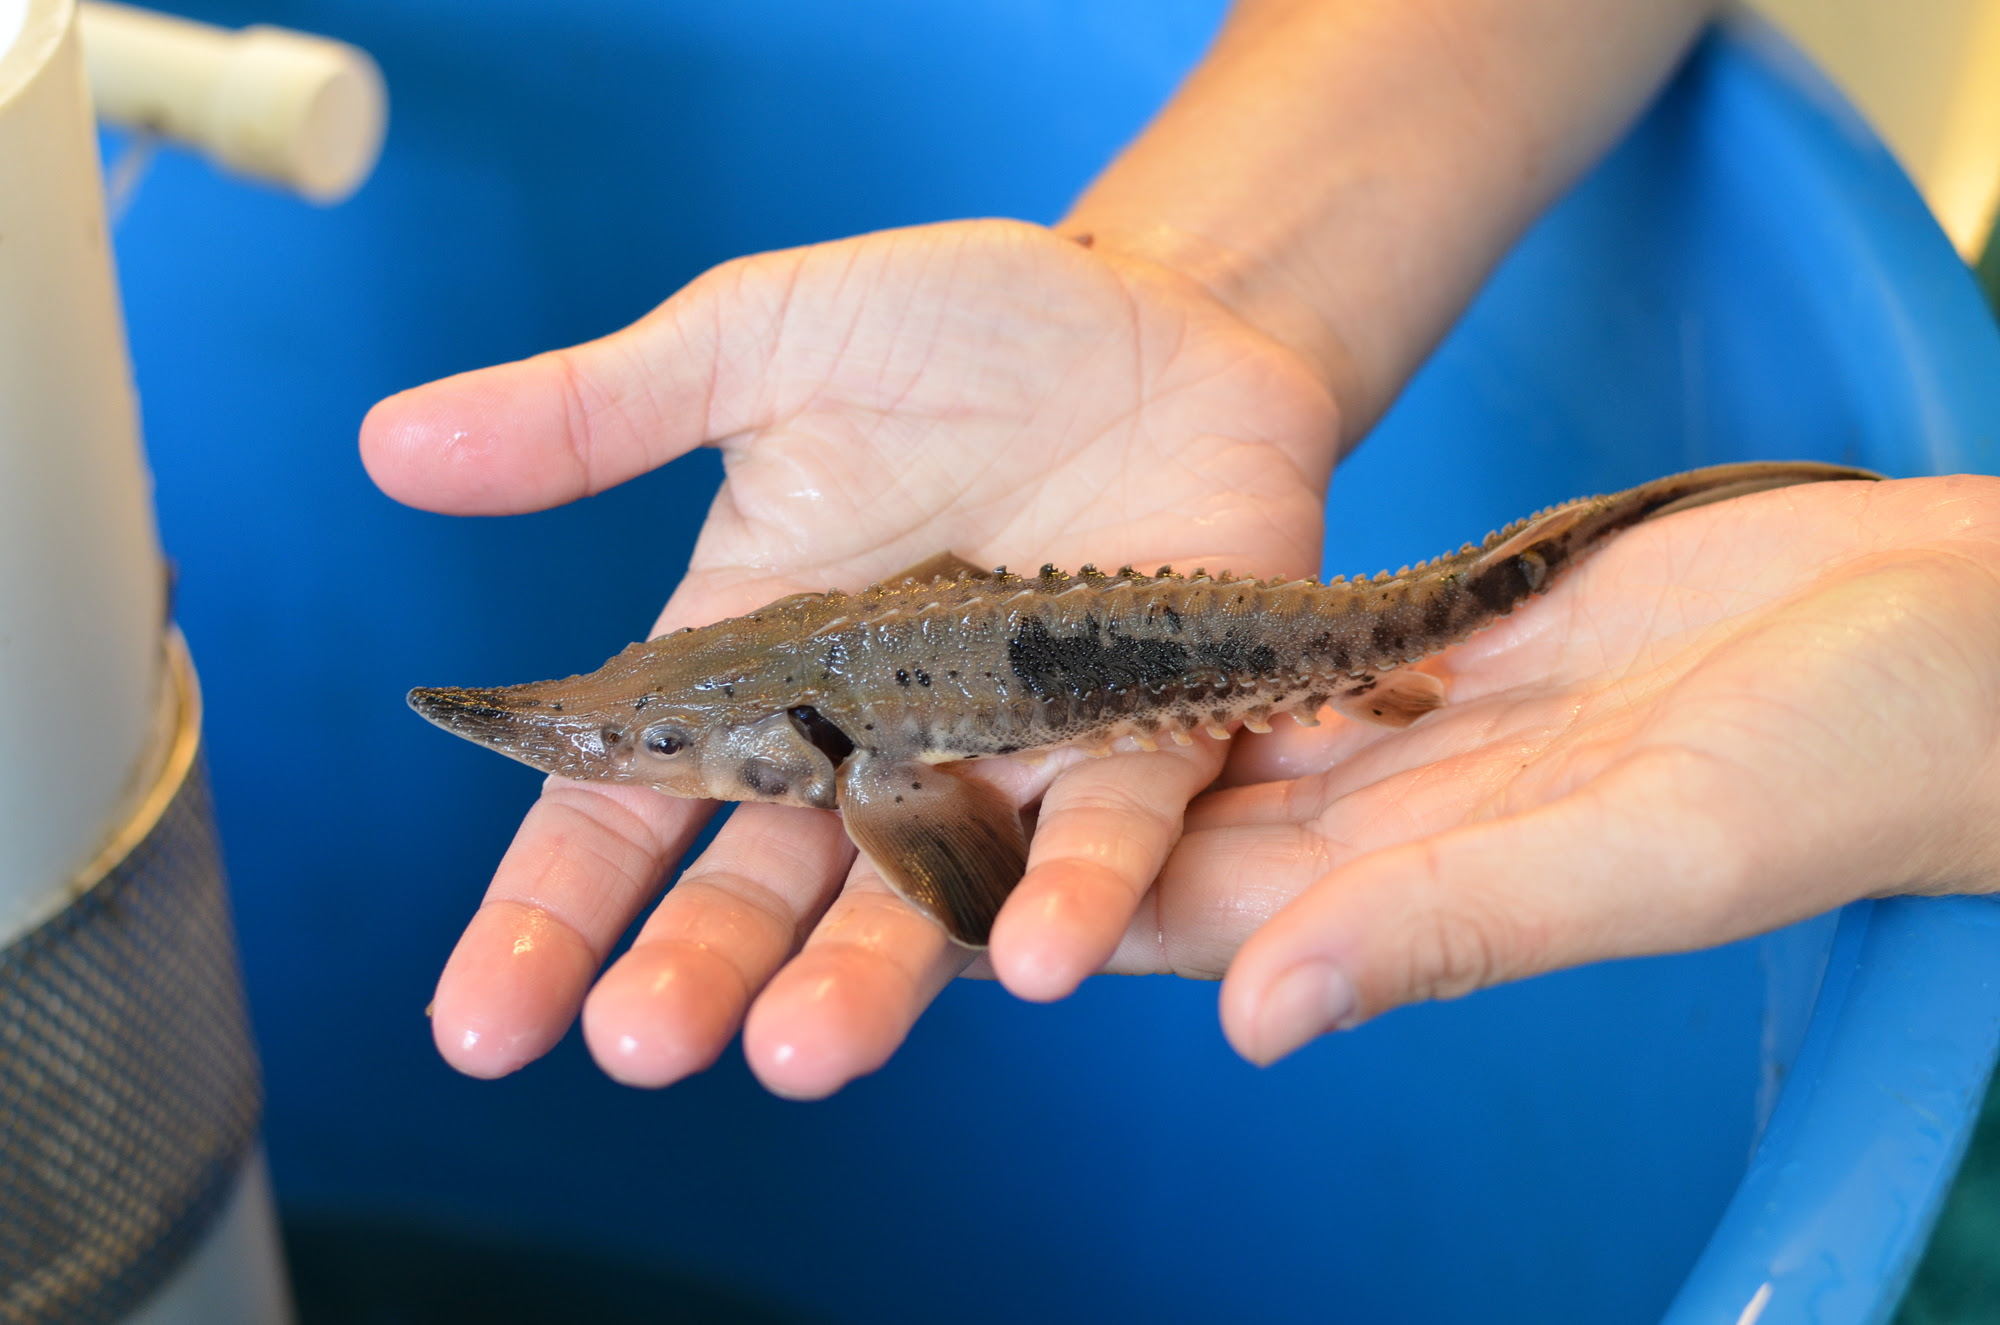 A close-up view of a hand-held young lake sturgeon.